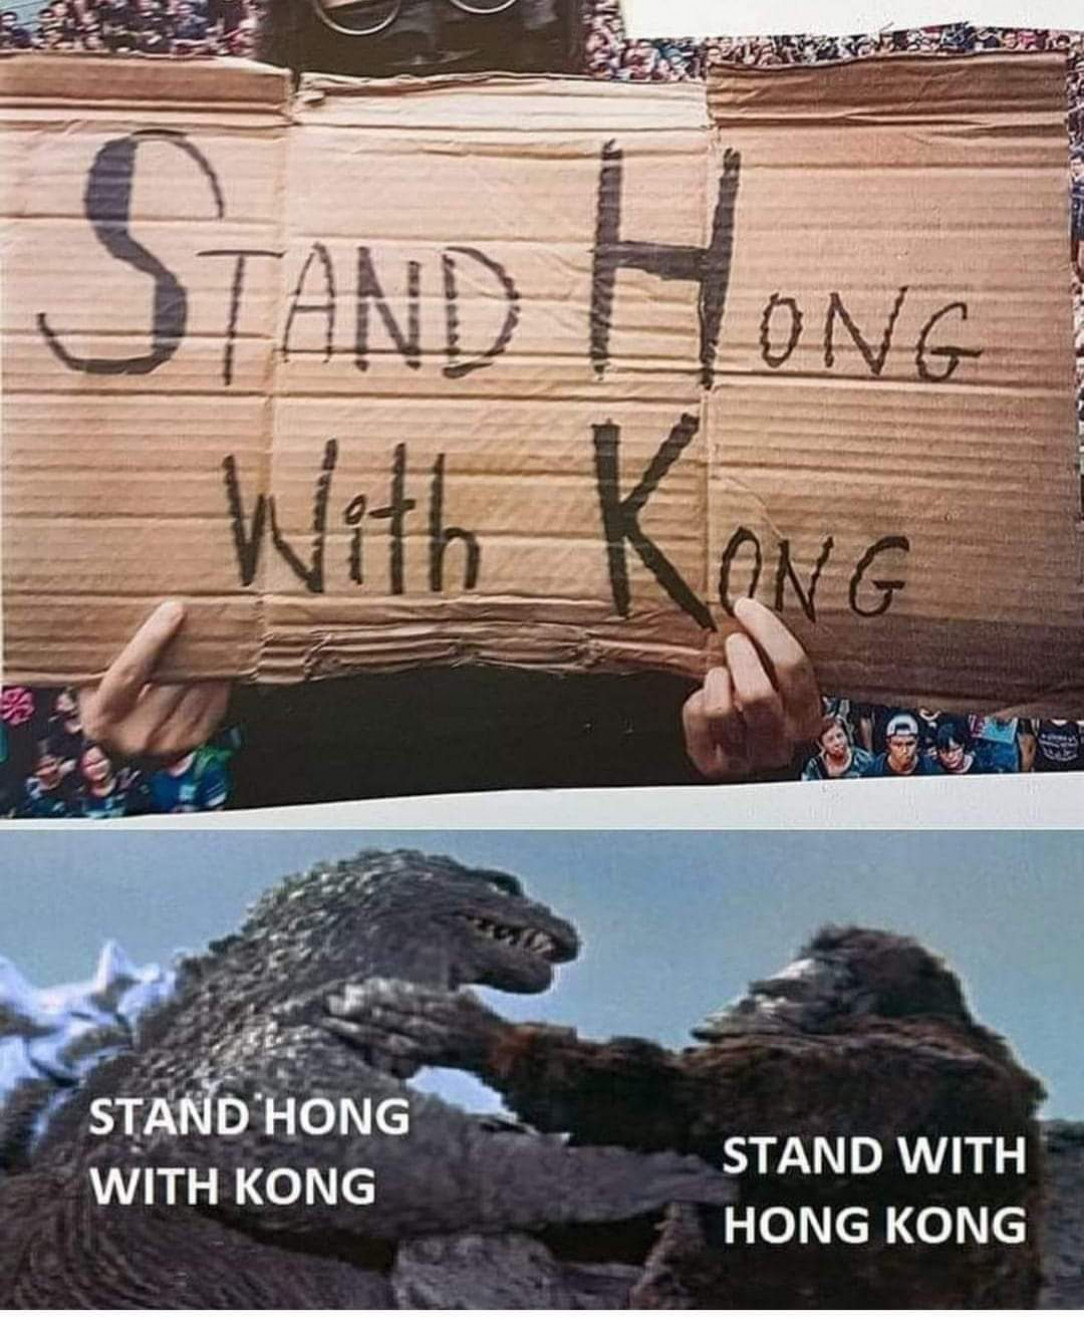 Stand Hong with Kong